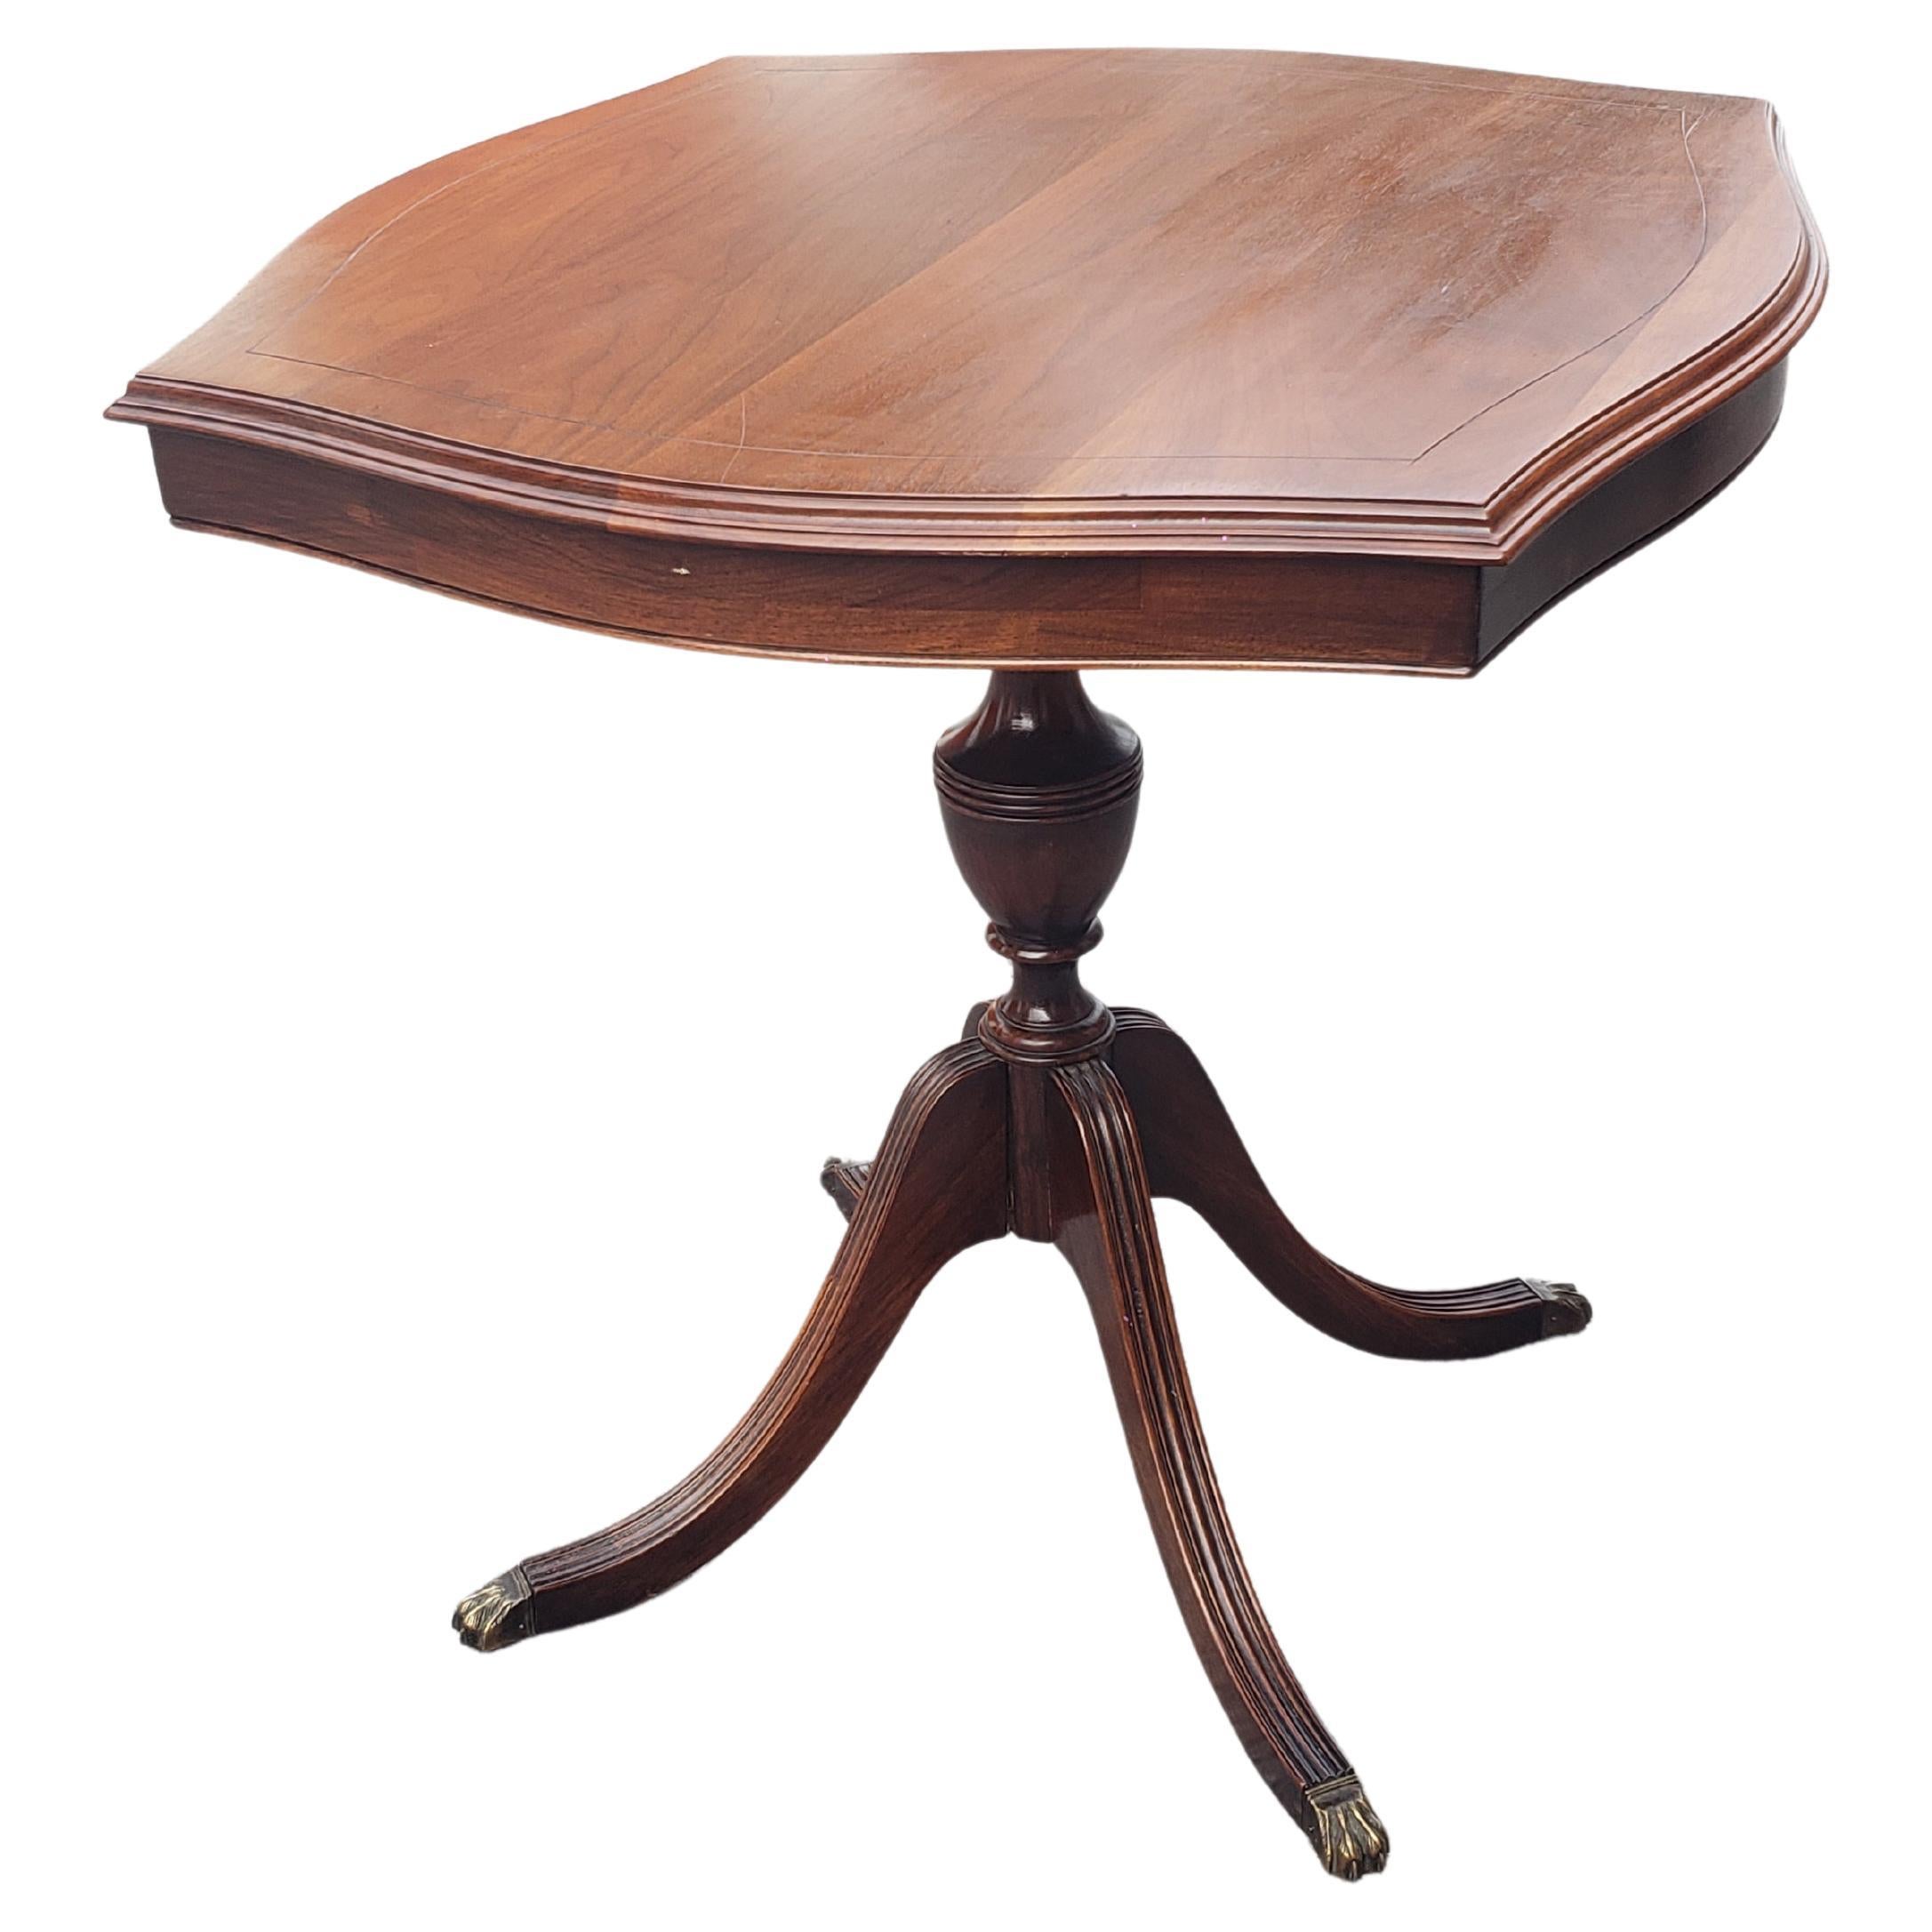 A Mid-Century Refinished Solid Walnut Pedestal Quadpod Tea Table with Brass Paw Feet. Measures 27.5